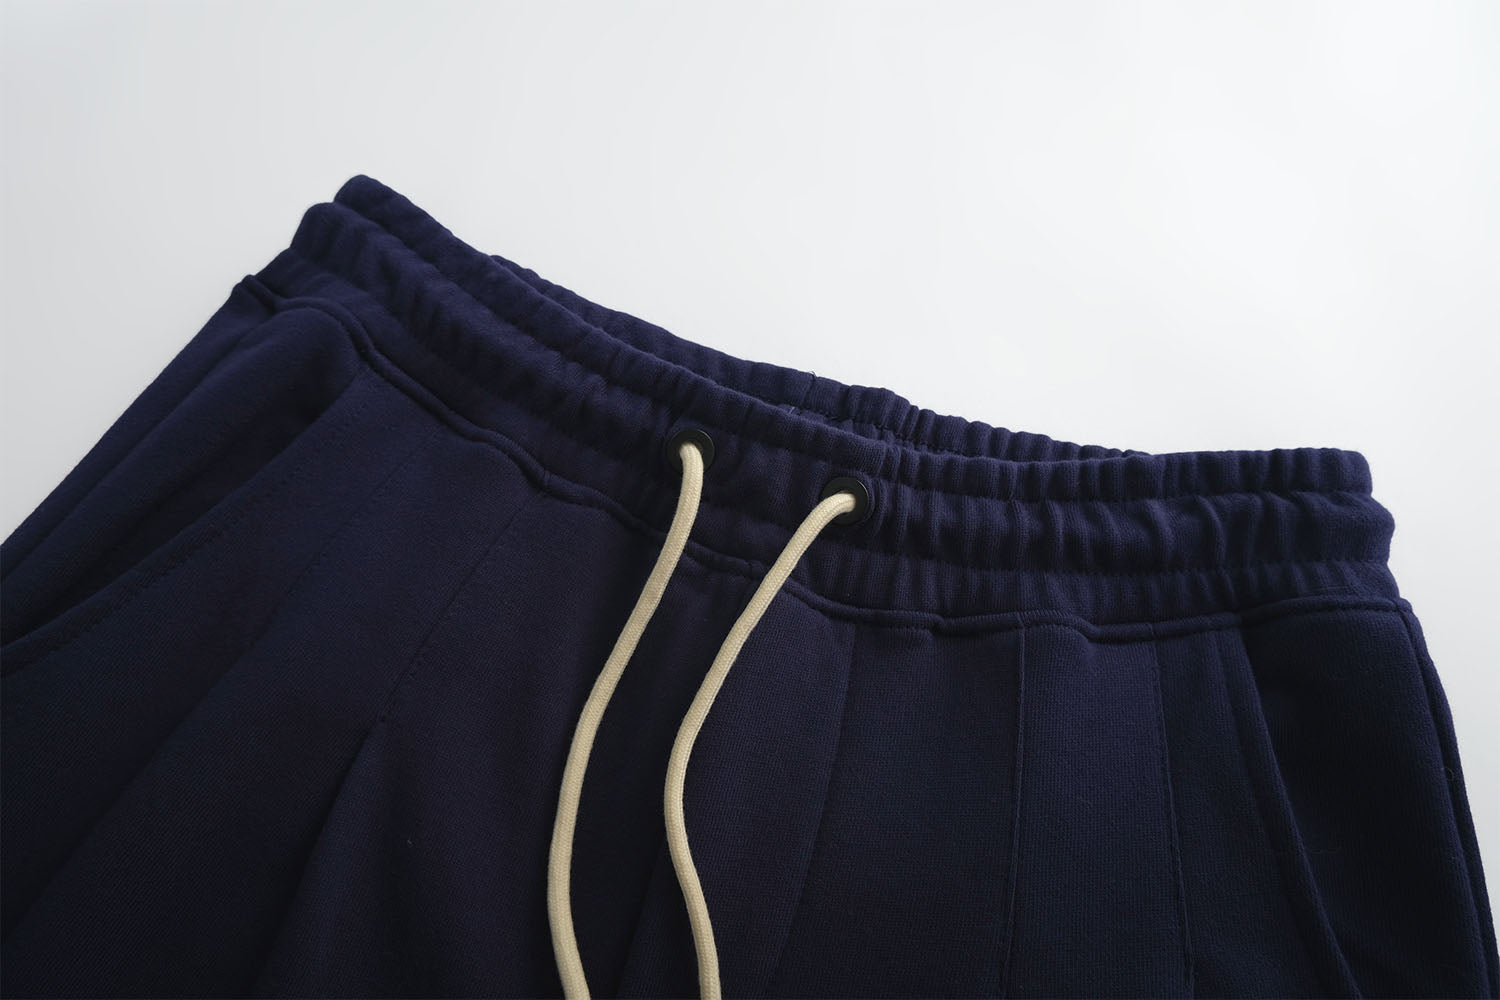 New 360G heavy knitted cotton loose sweatpant